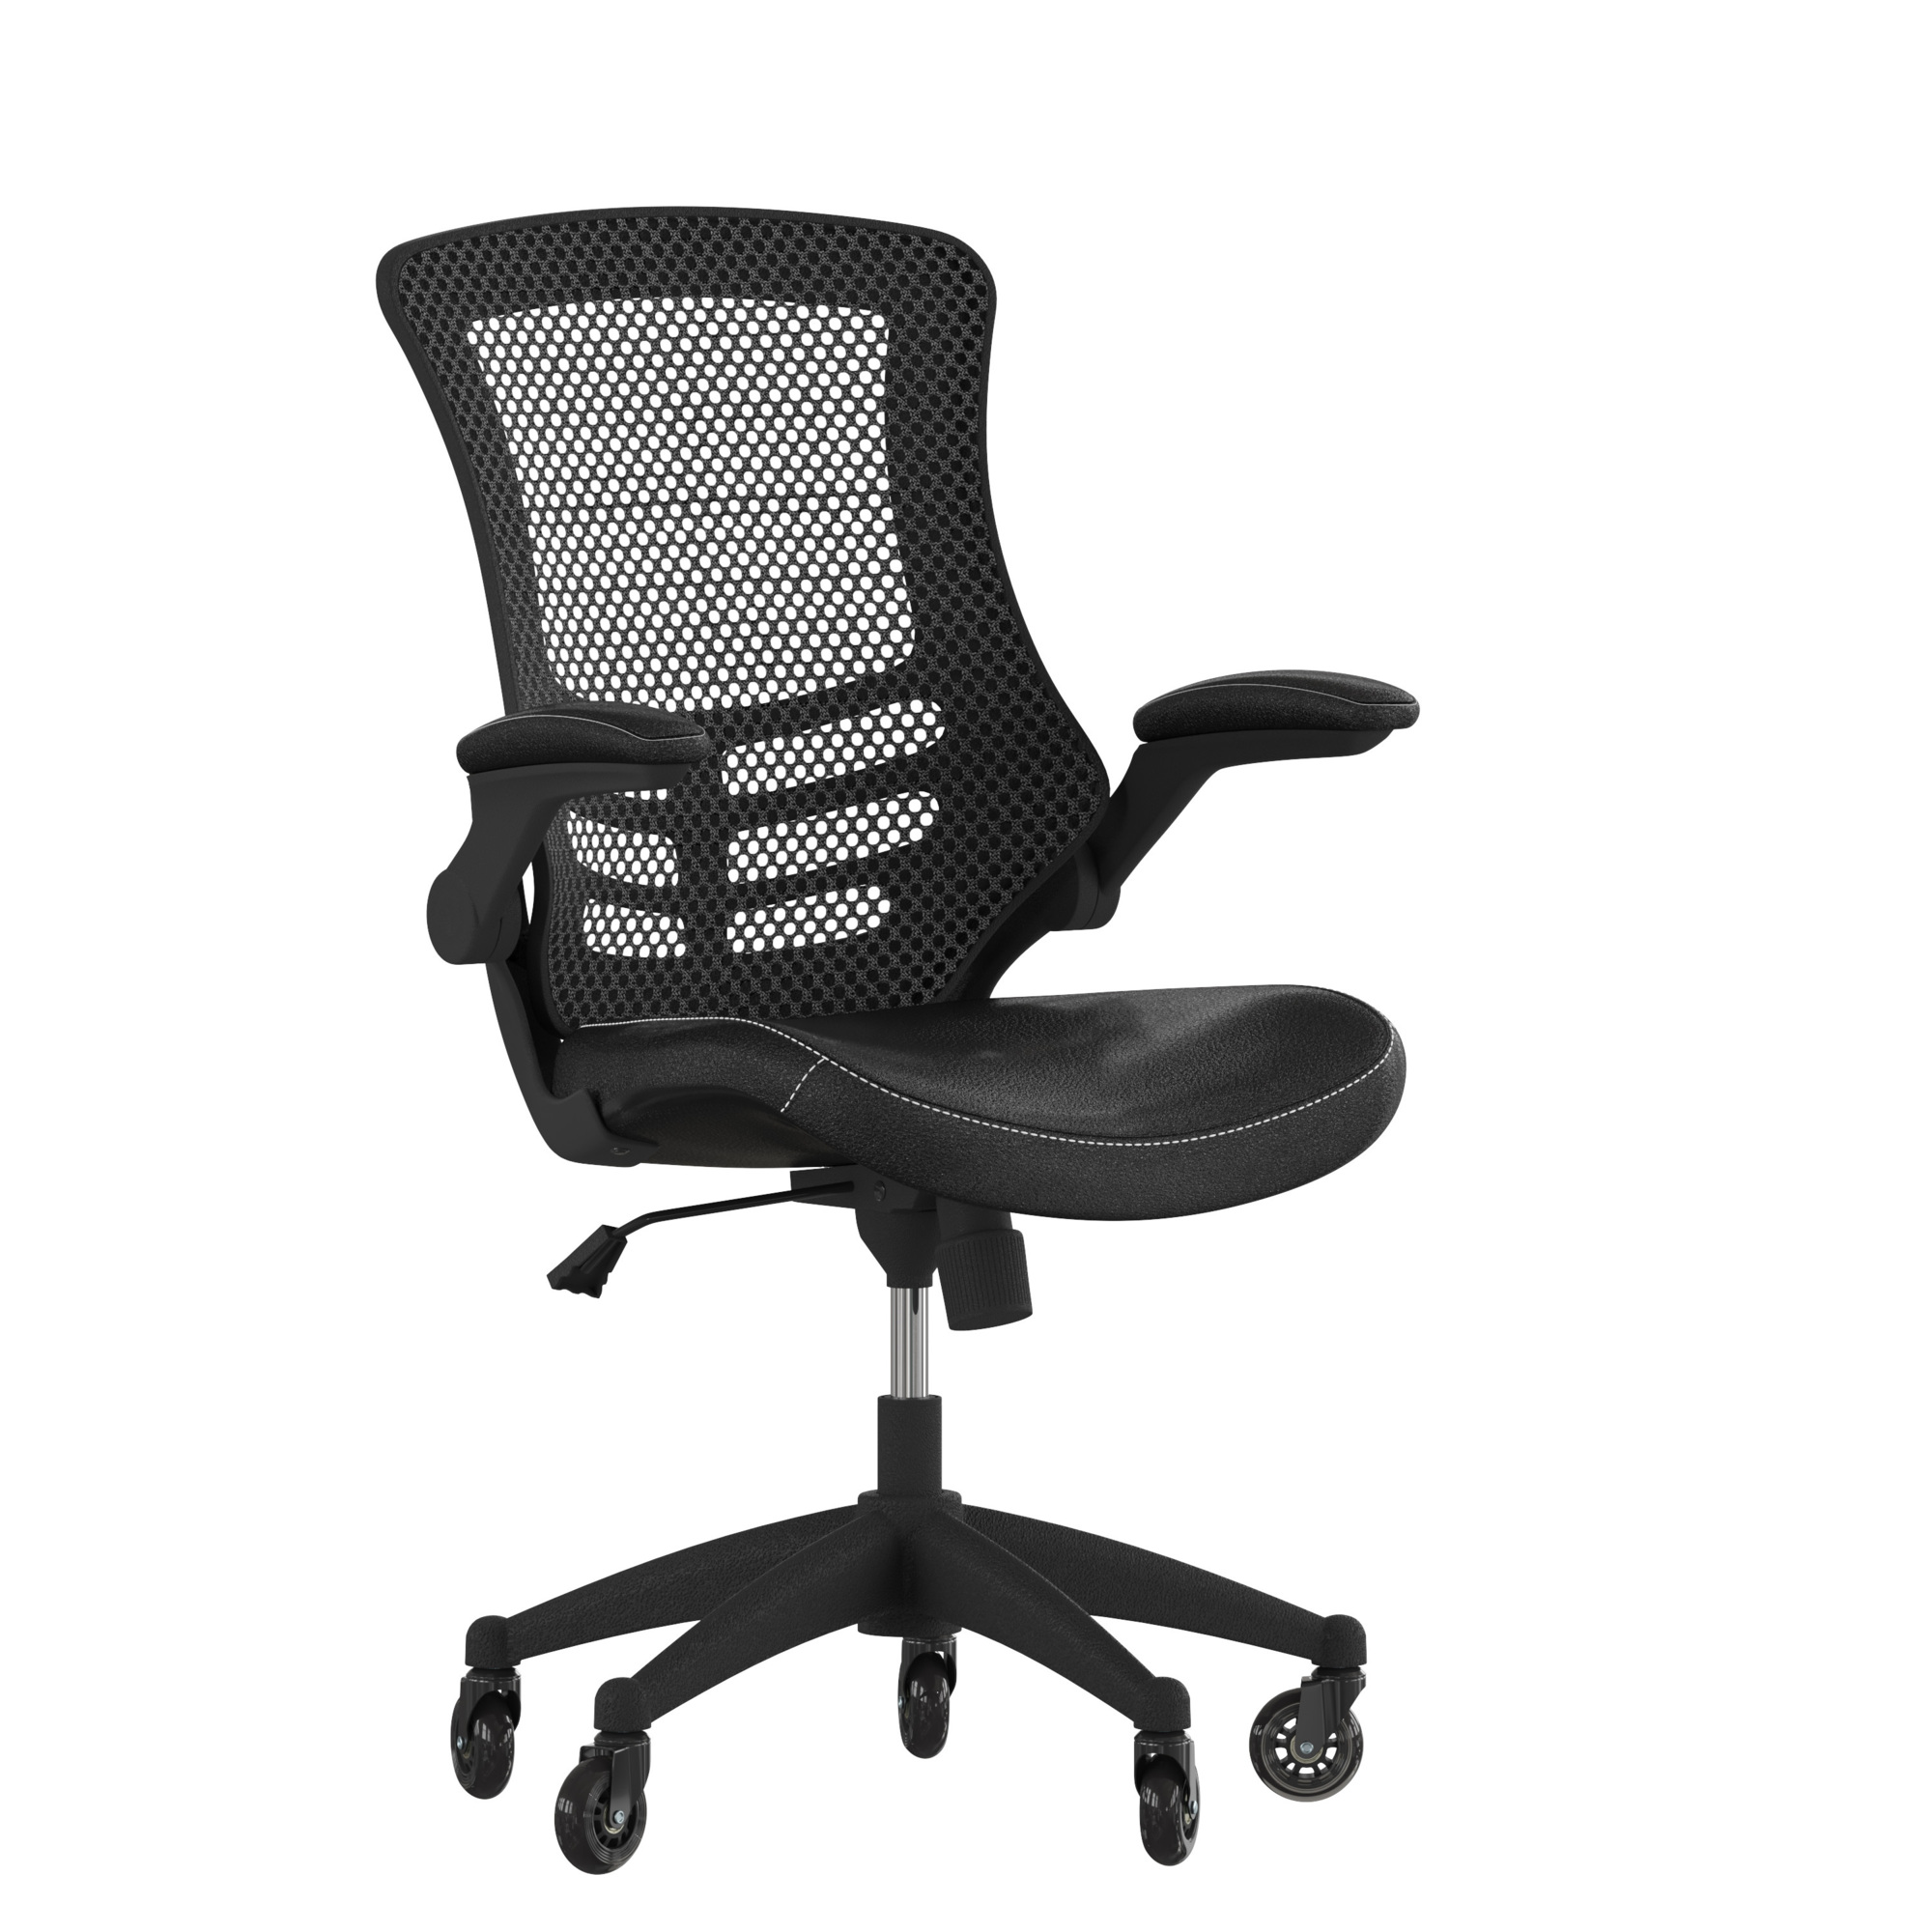 Flash Furniture, Black Leather Mid-Back Task Chair - Roller Wheels, Primary Color Black, Included (qty.) 2, Model BLX5MLEARLB